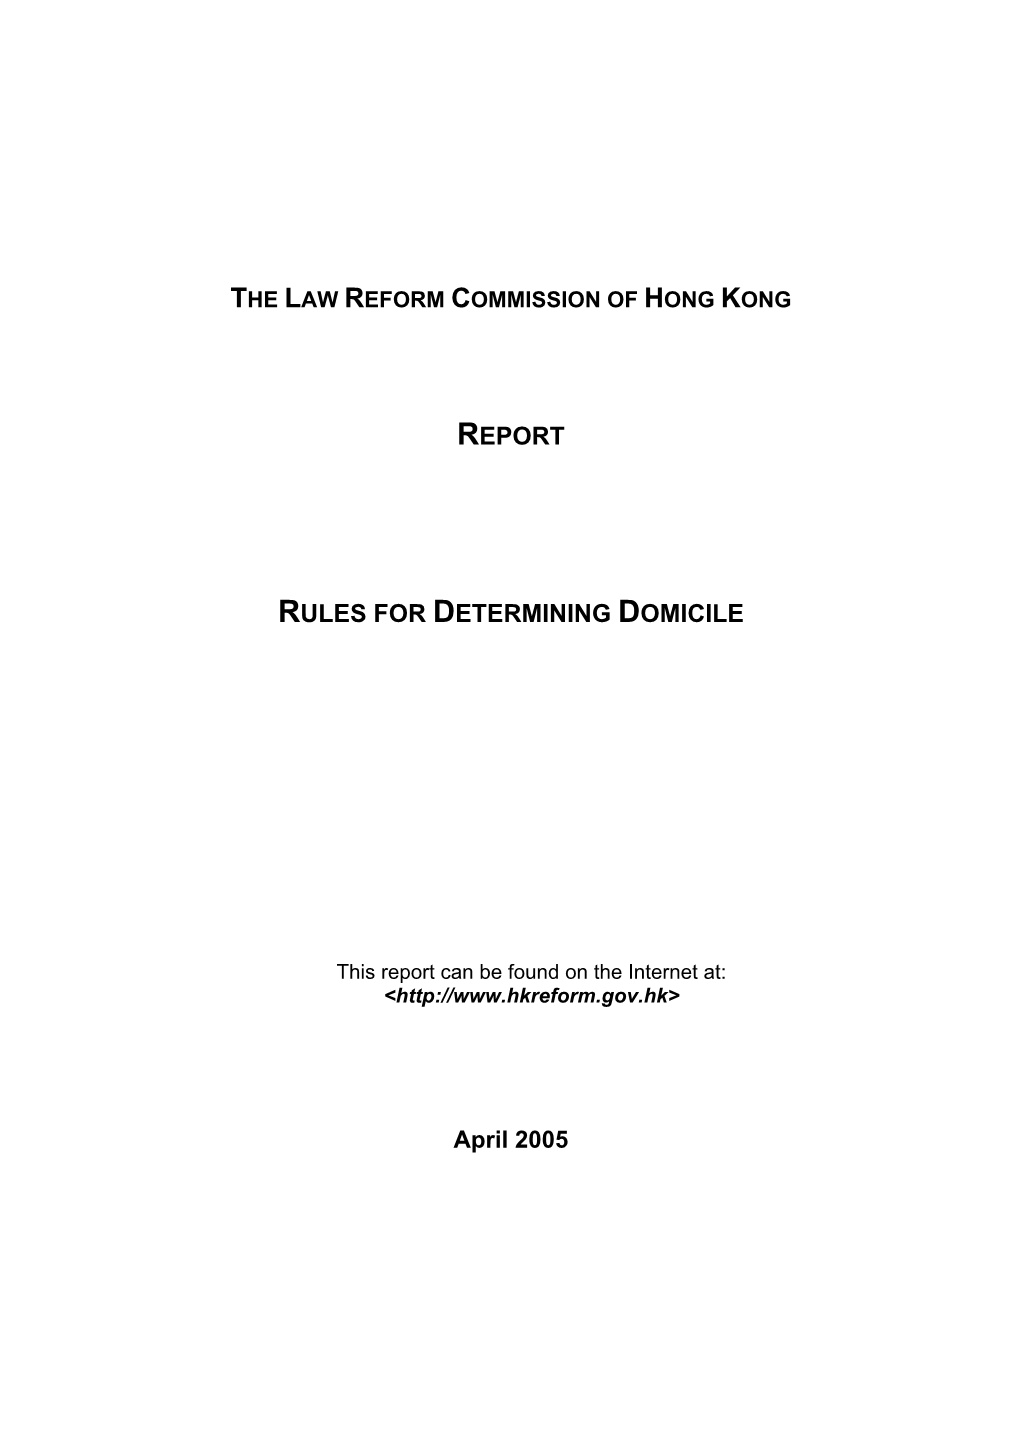 Report Rules for Determining Domicile